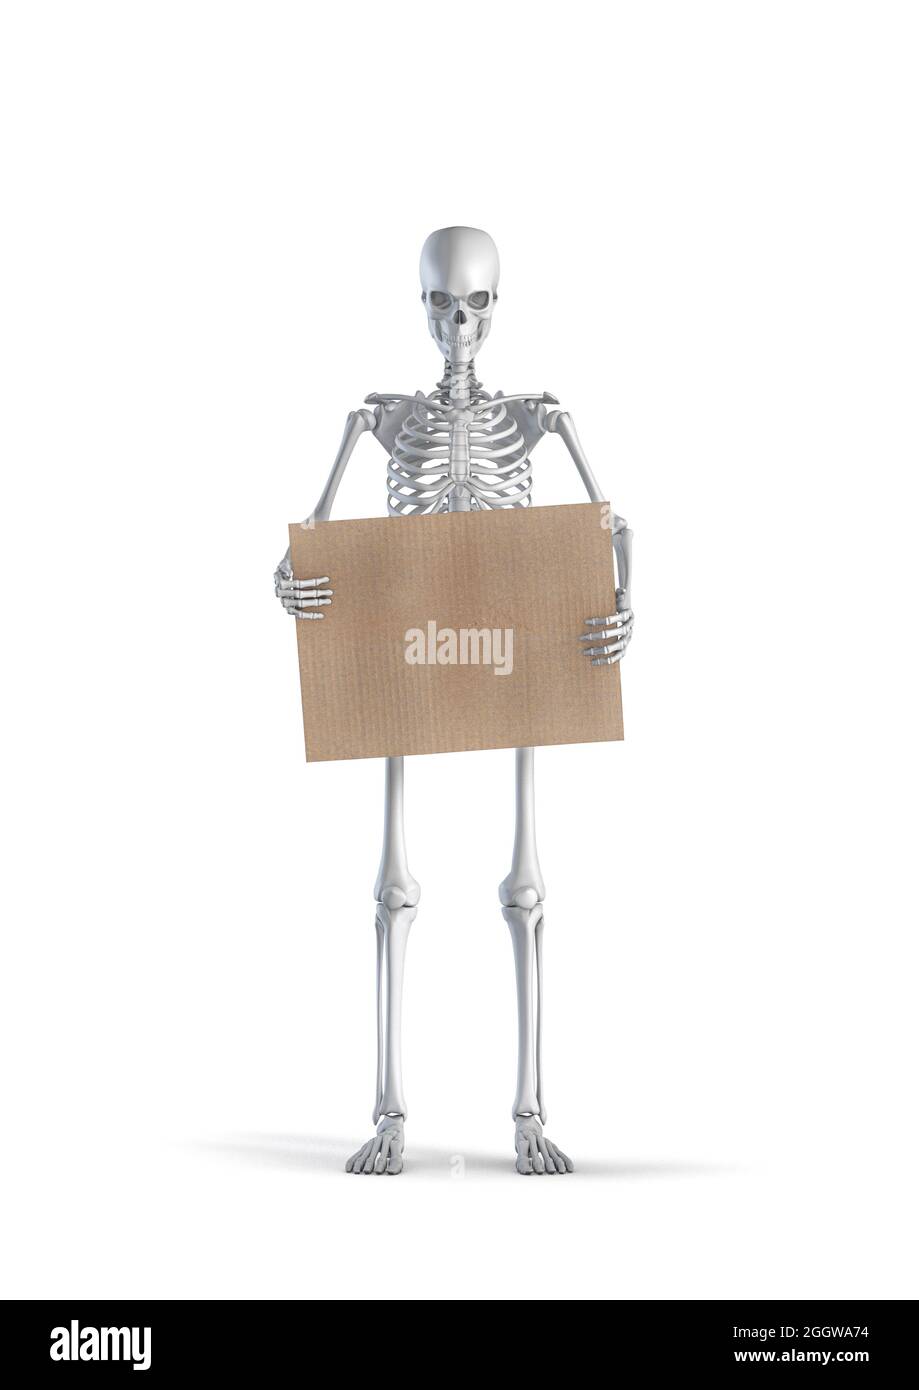 Skeleton with message - 3D illustration of male human skeleton figure holding blank cardboard sign isolated on white studio background Stock Photo